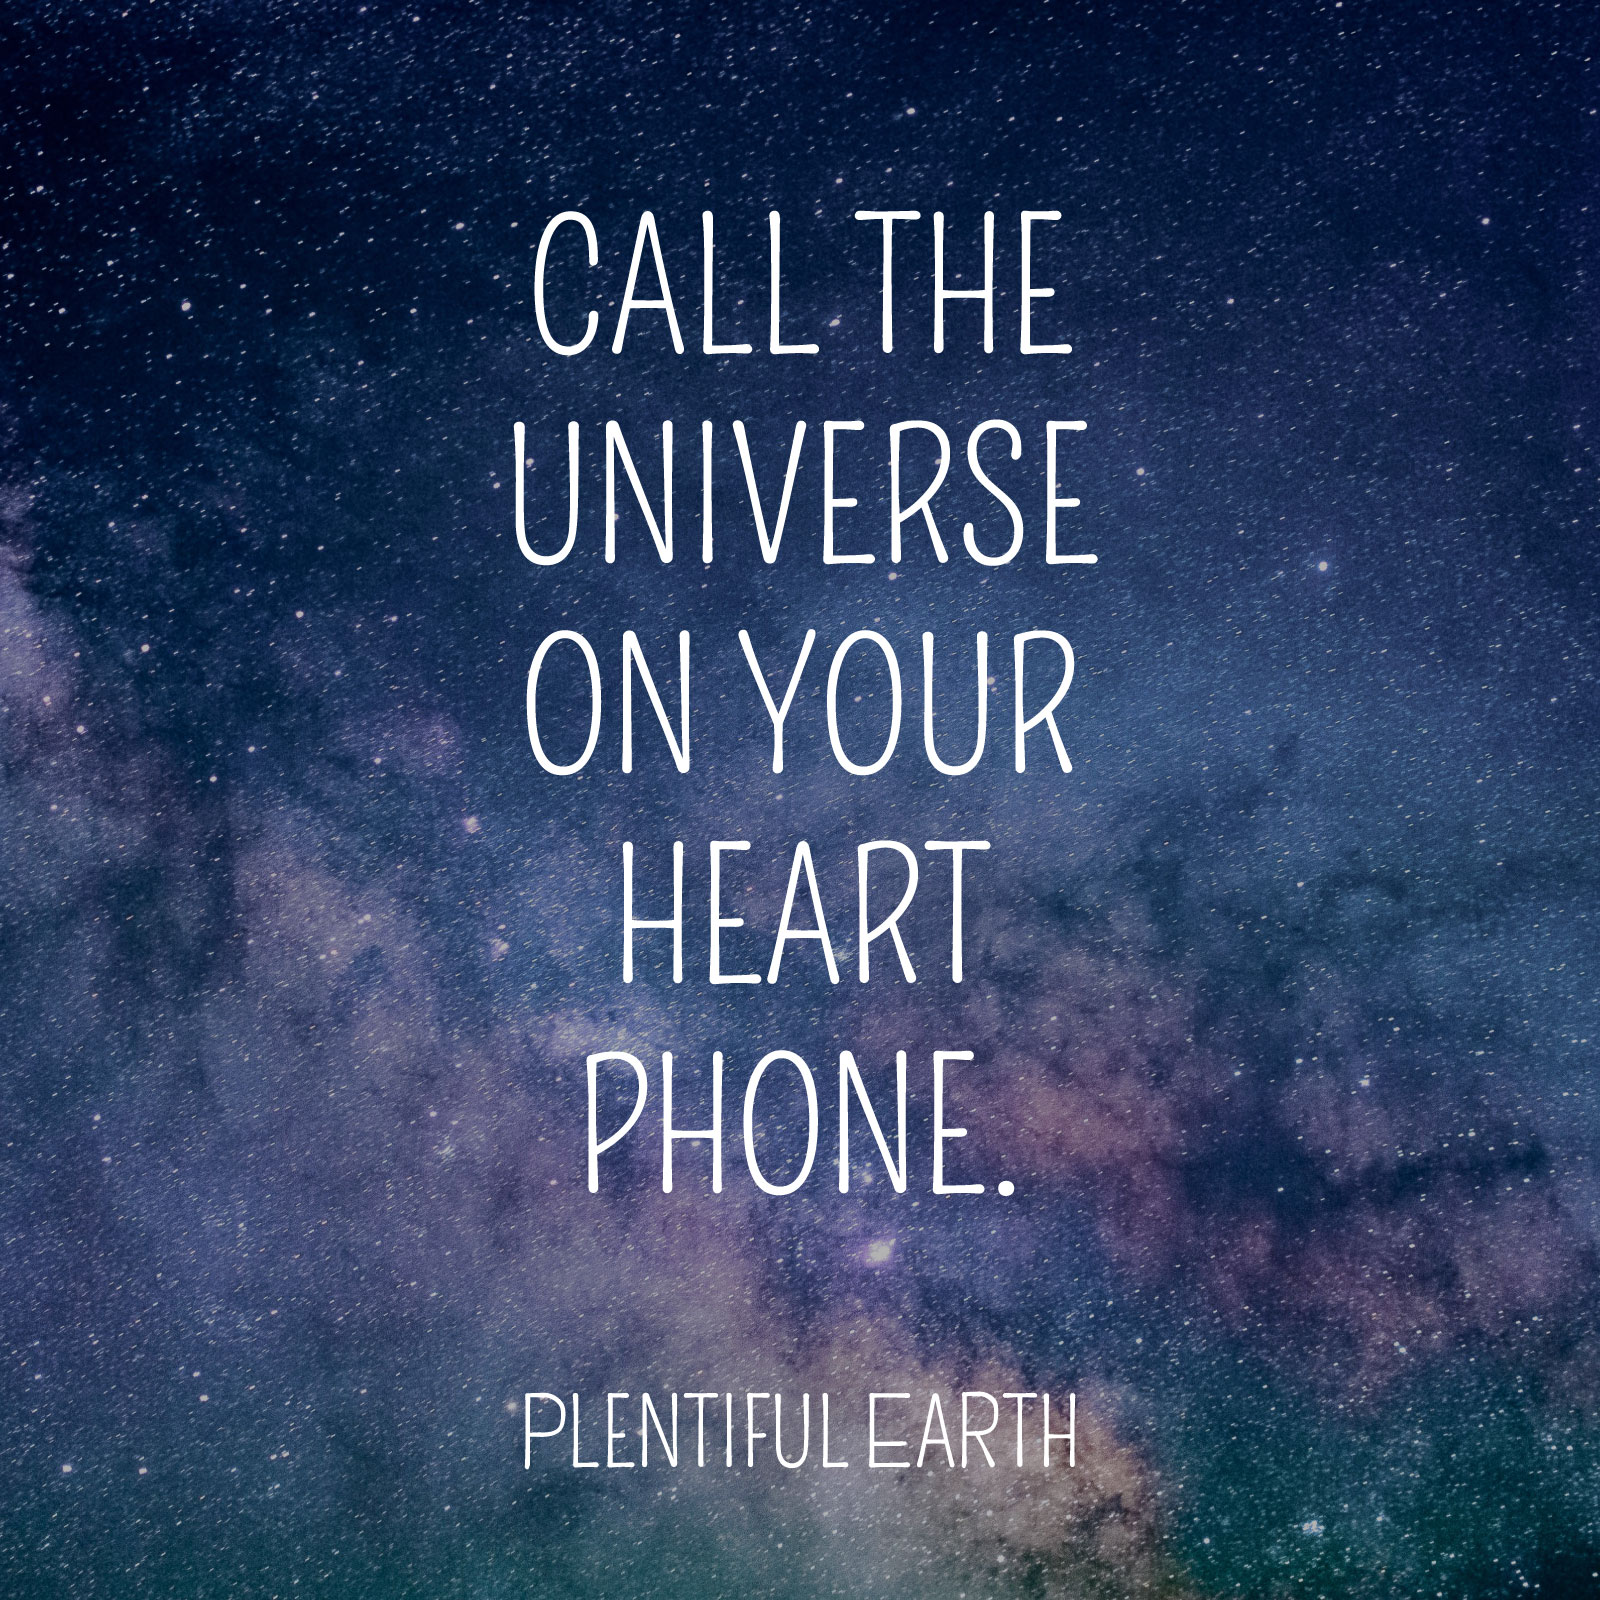 Starry skies with a witchy inspirational quote: "call the universe on your heart phone. - plentiful earth.